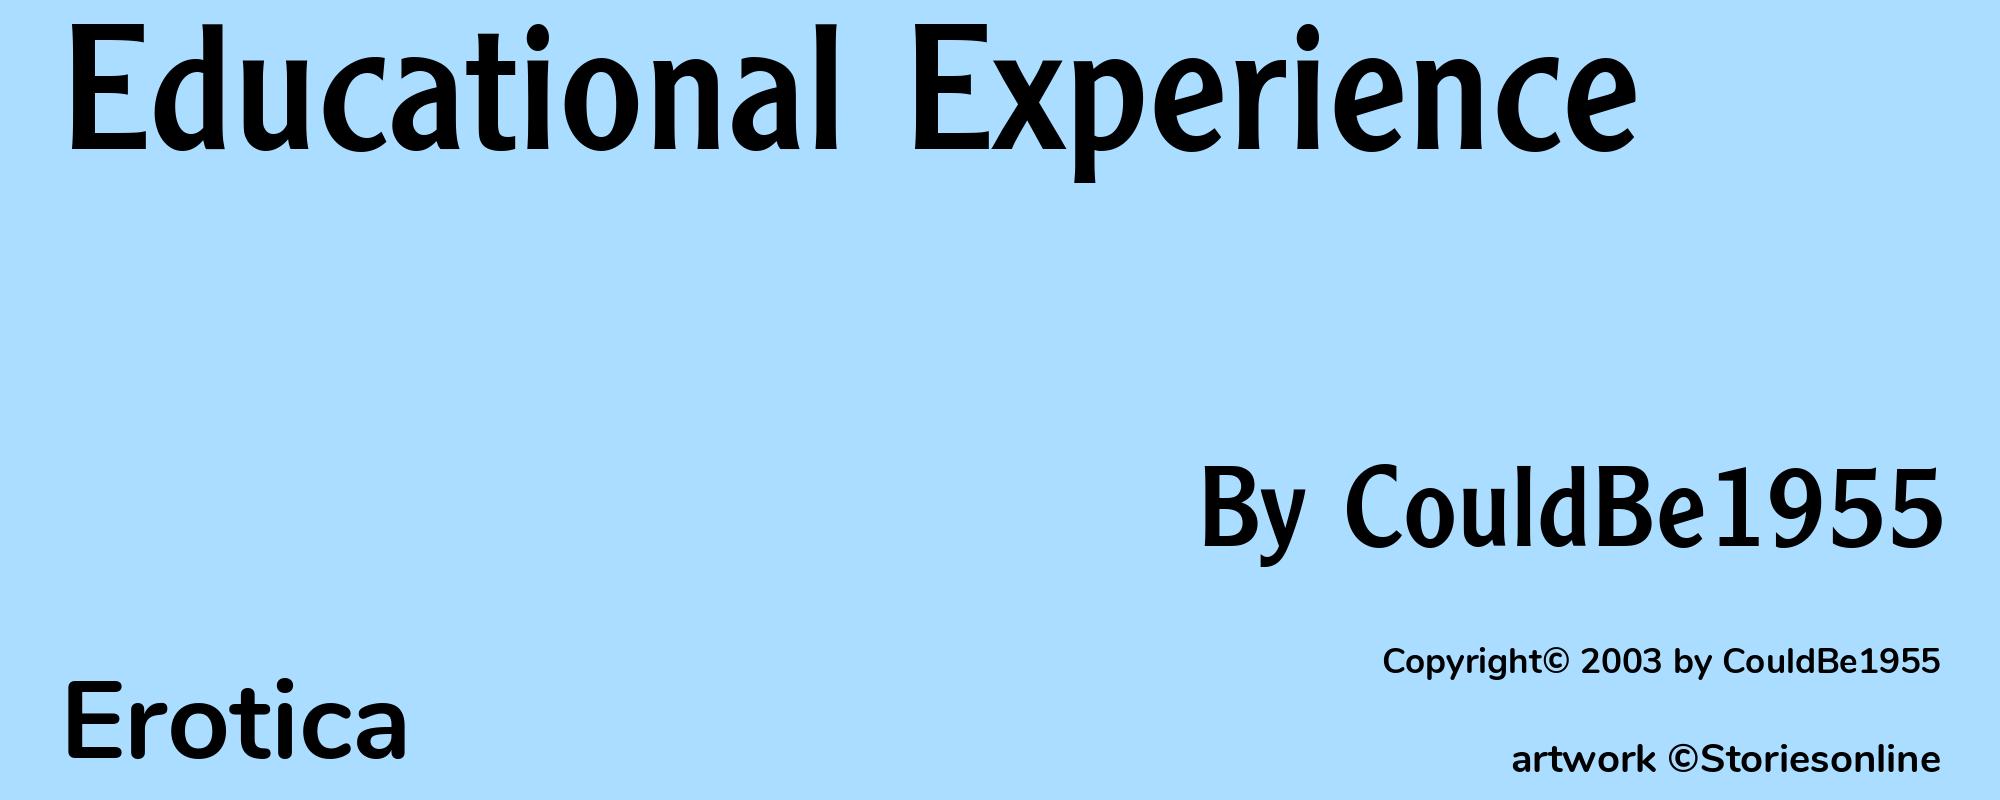 Educational Experience - Cover